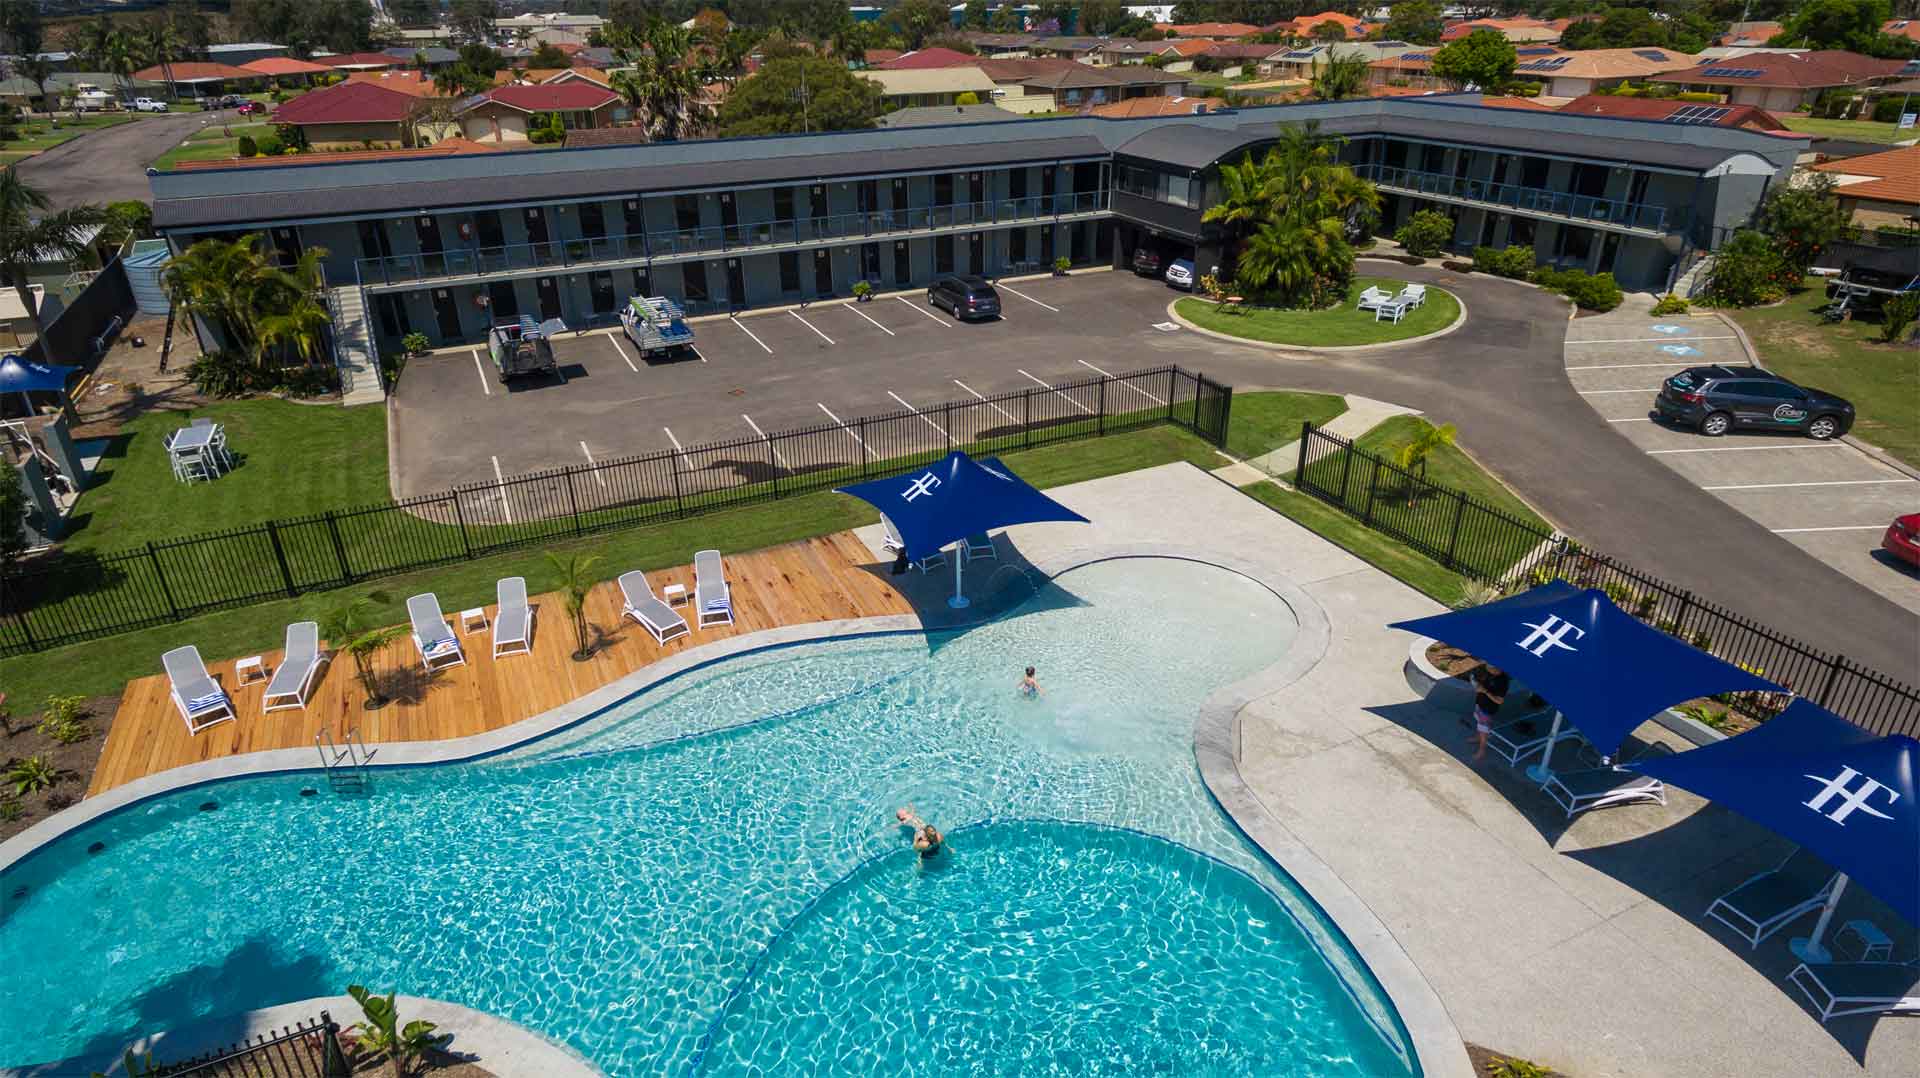 29. Aerial image of Hotel Forster including pool, water slide and tennis court